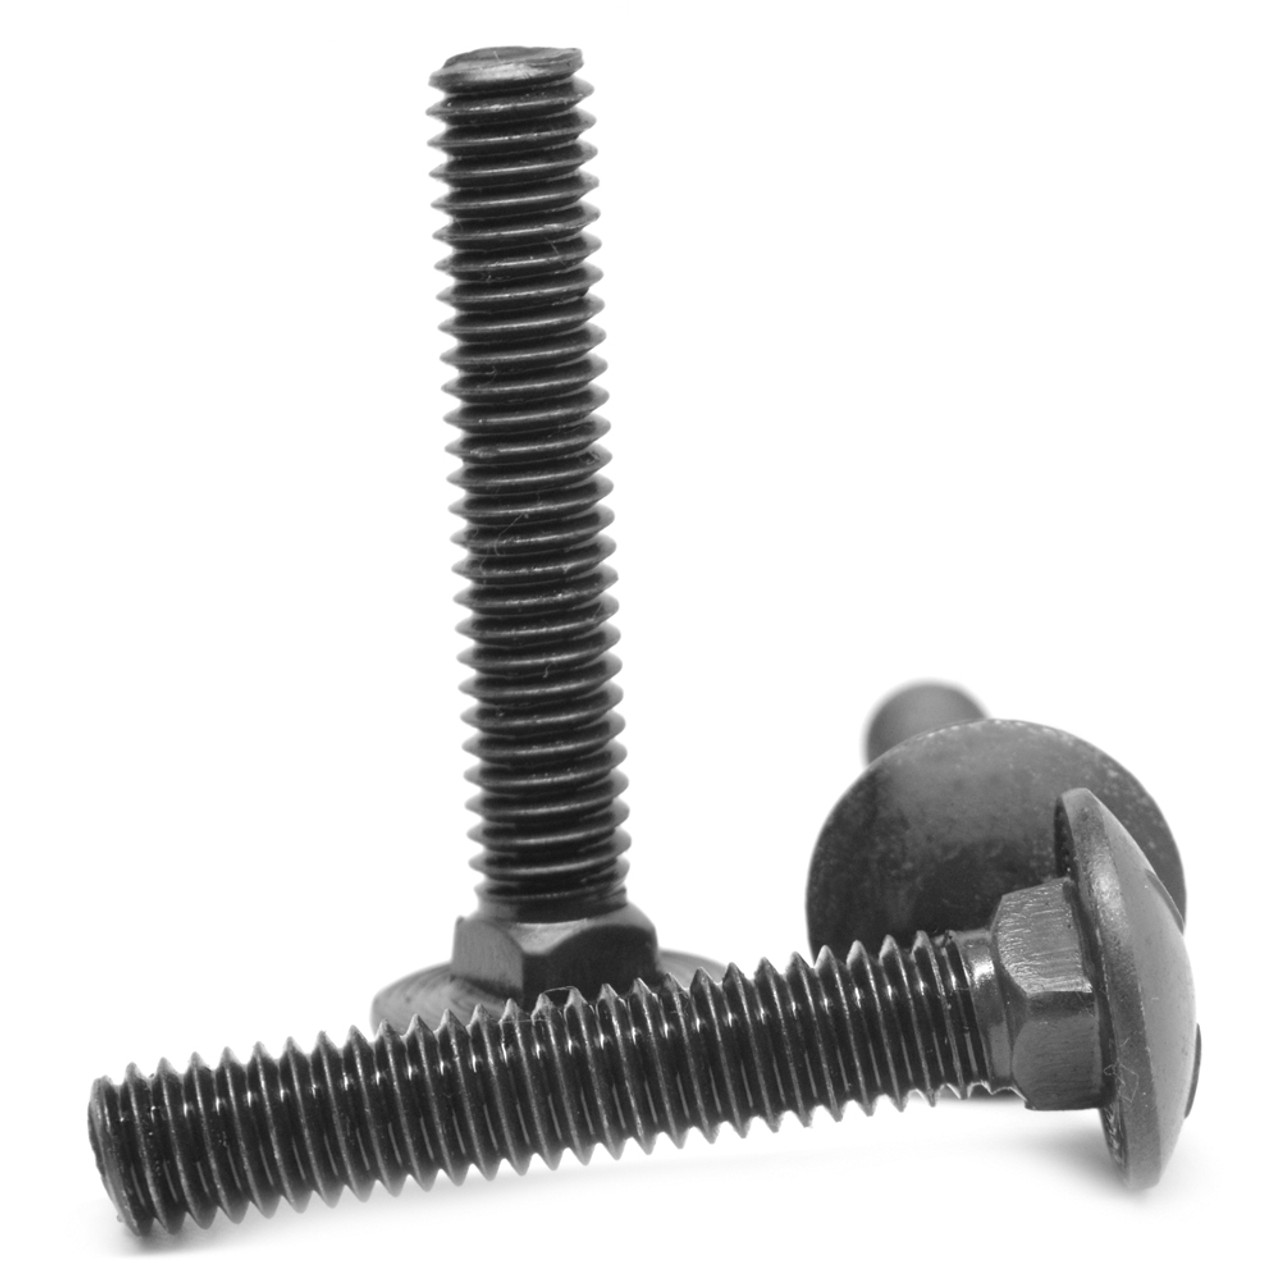 5/16-18 x 4 Coarse Thread Carriage Bolt Low Carbon Steel Black Oxide